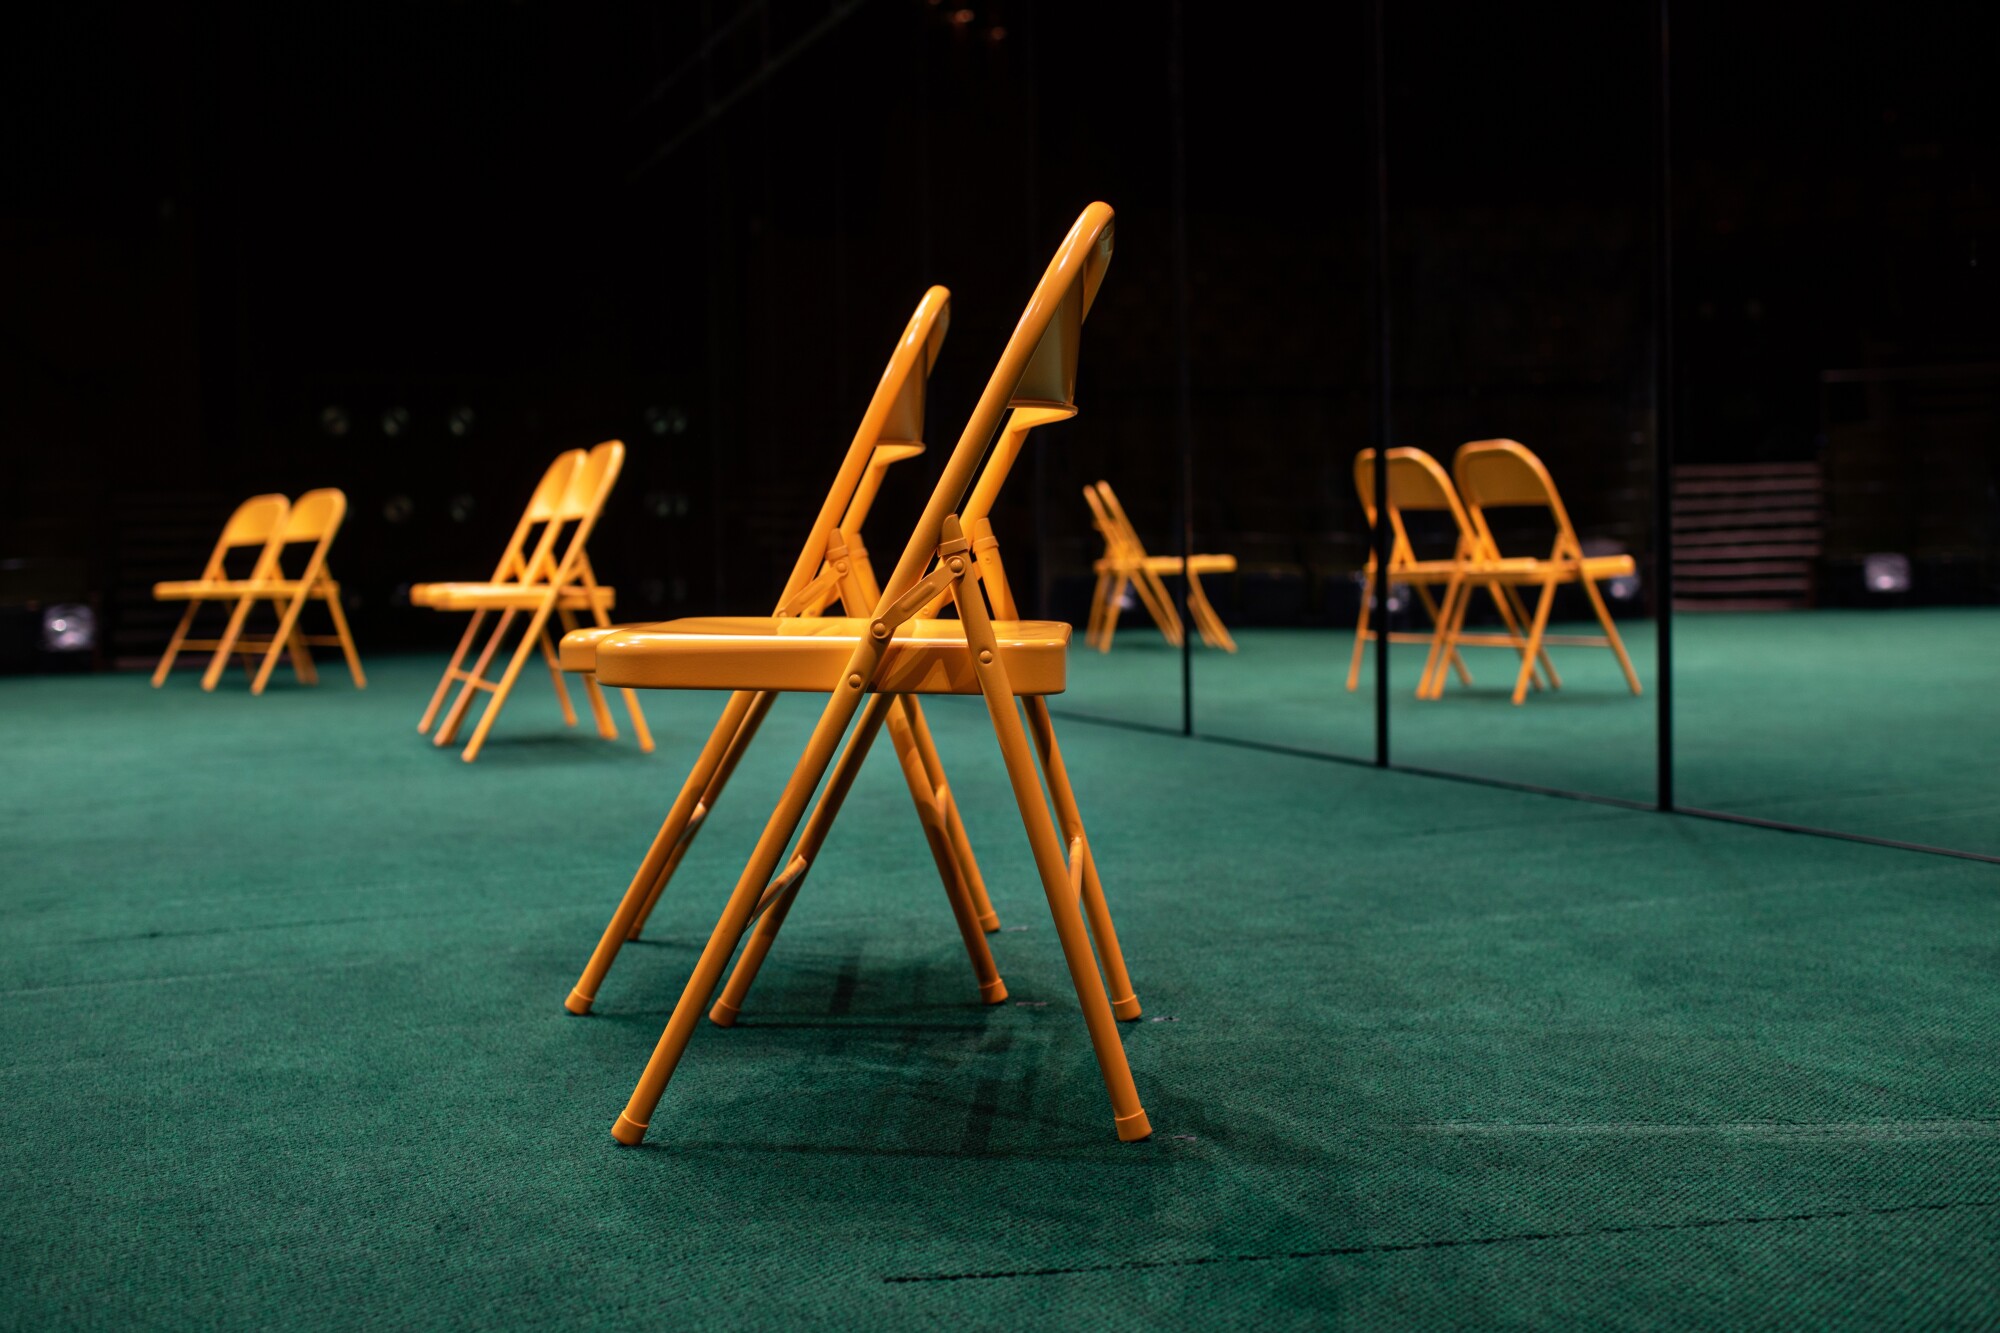 Yellow folding chairs are used during the counseling scene in the play.